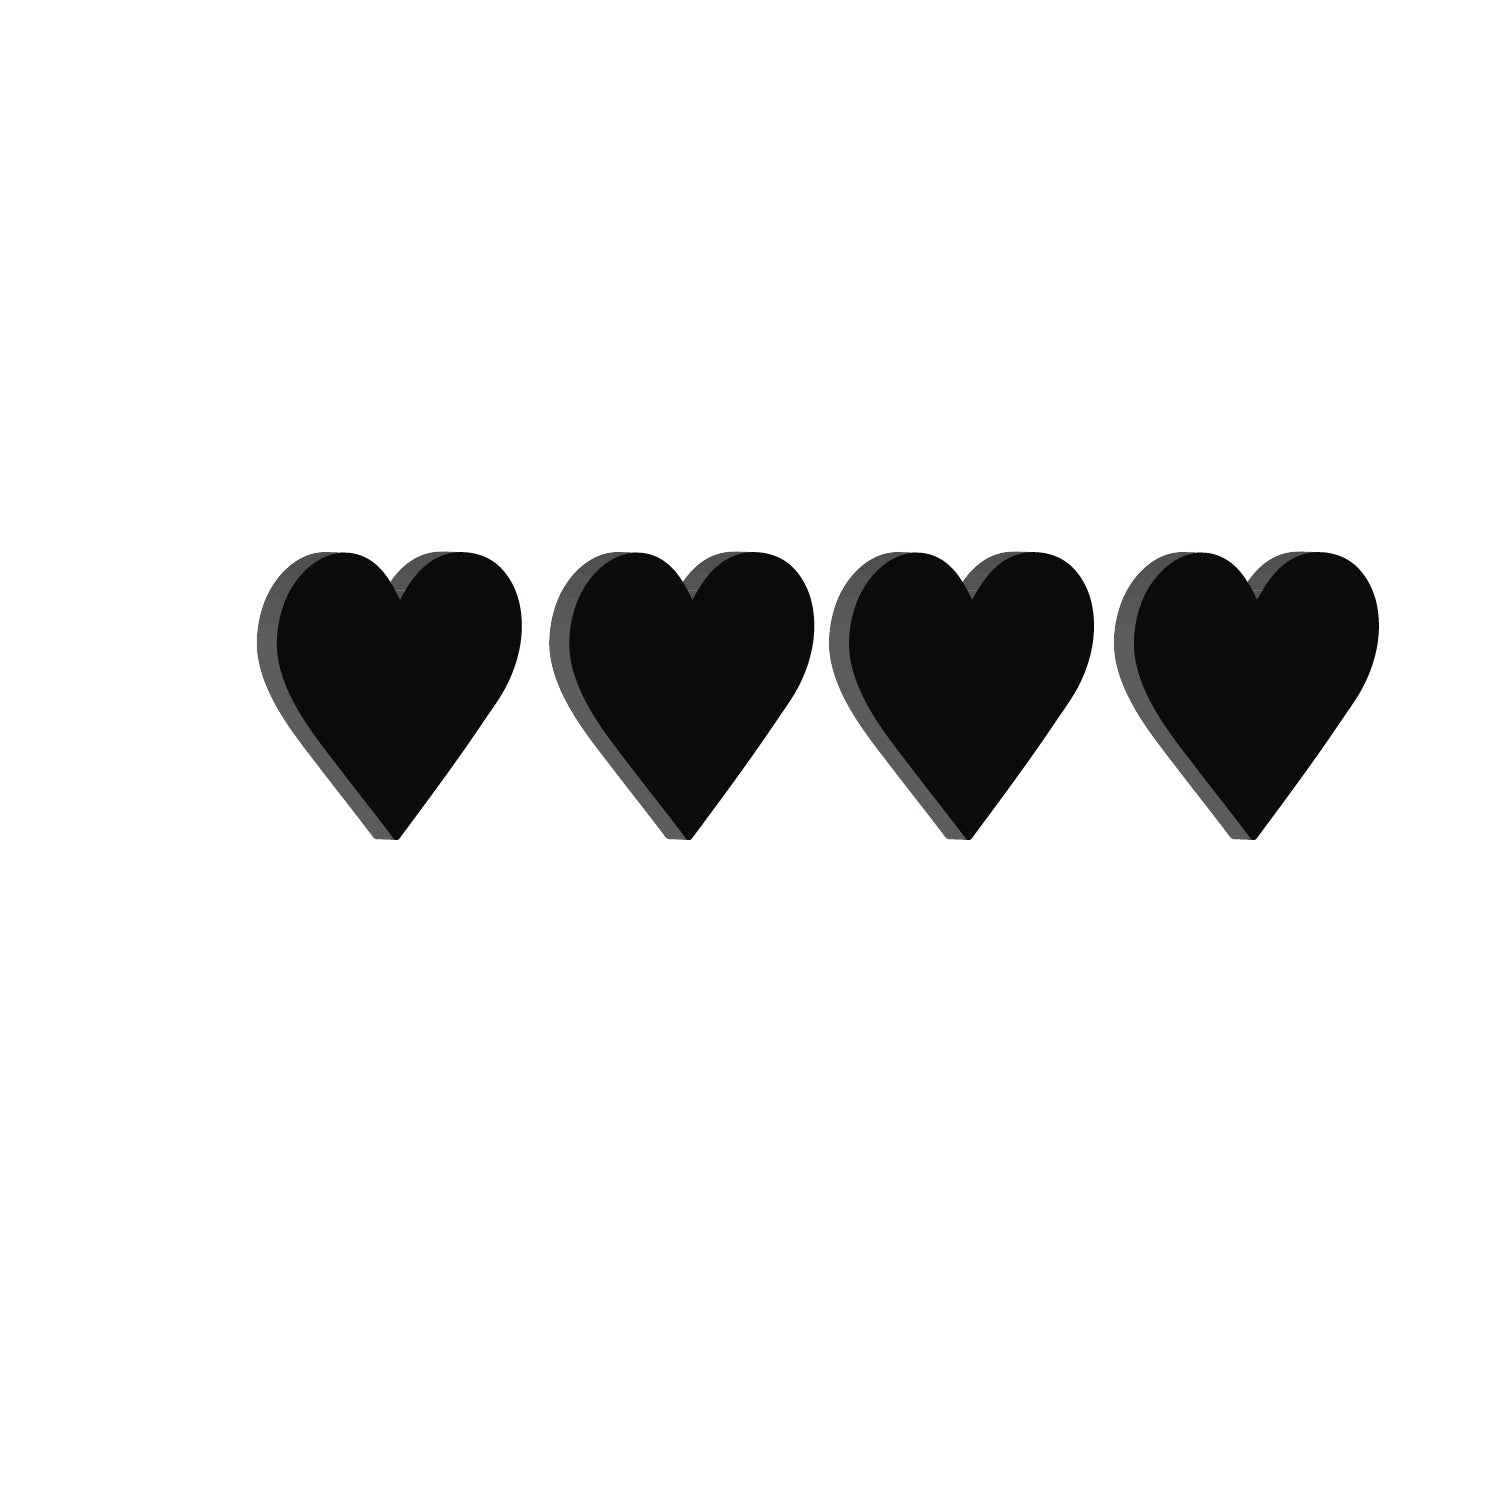 Set of 4 "Hearts" Black MDF Engineered Wooden Wall Art/Hanging Cutout for Home Décor 1